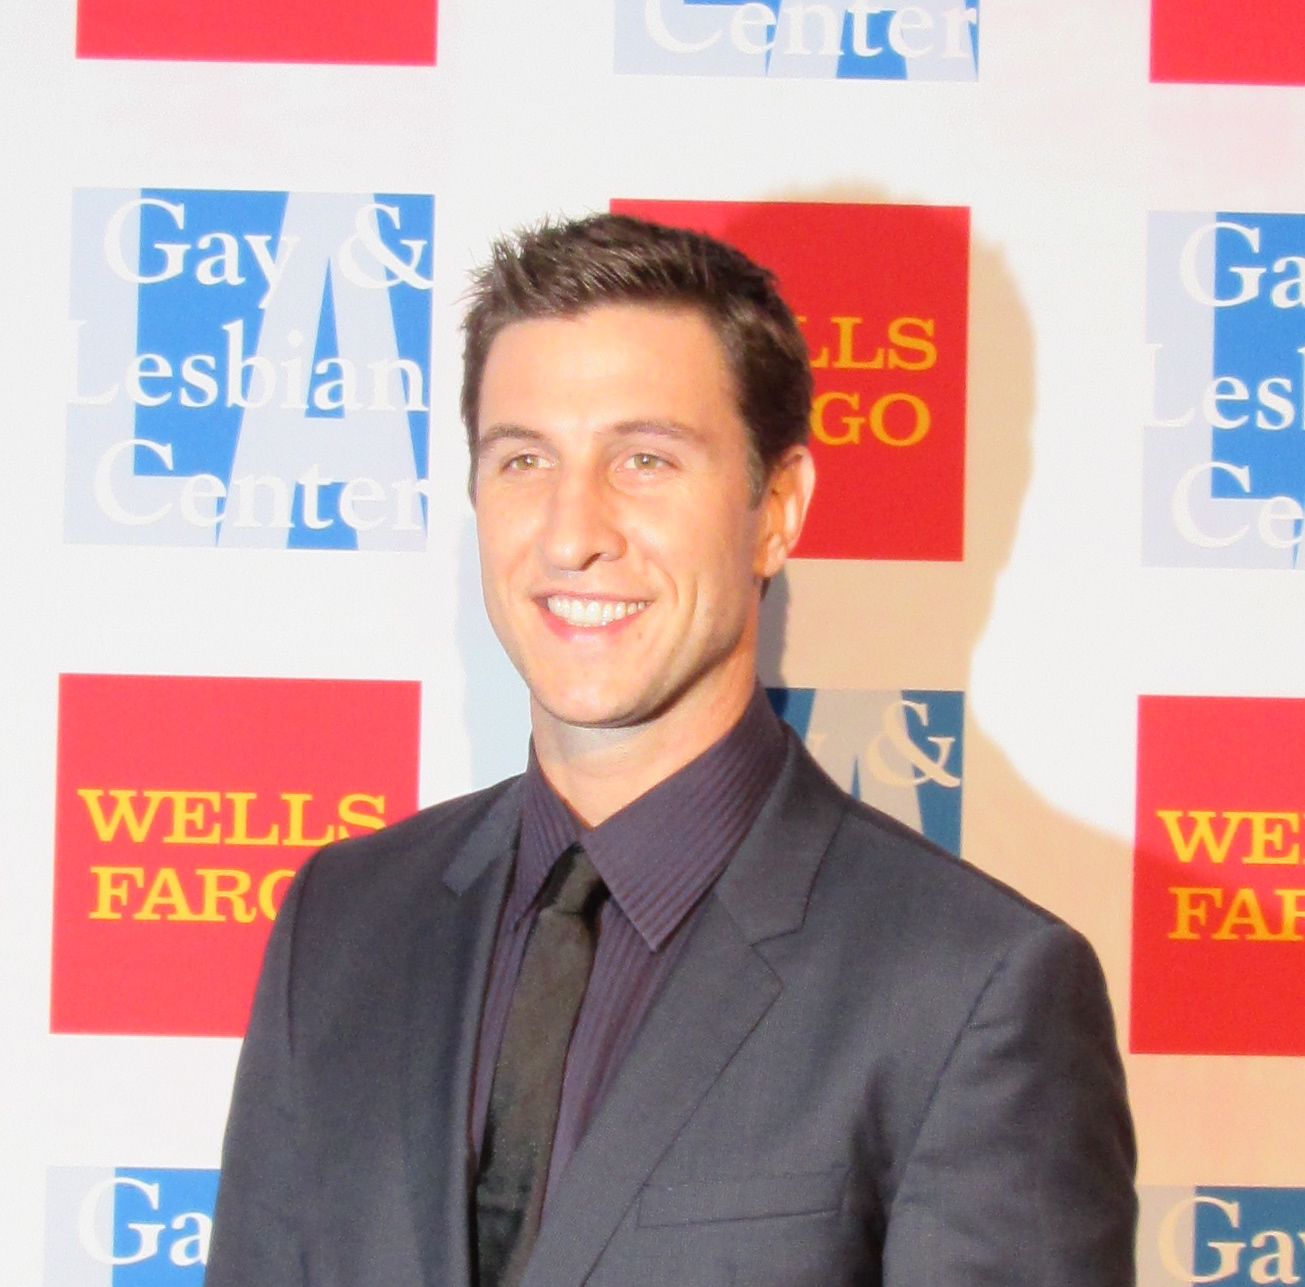 a man wearing a suit stands on a red and blue carpet